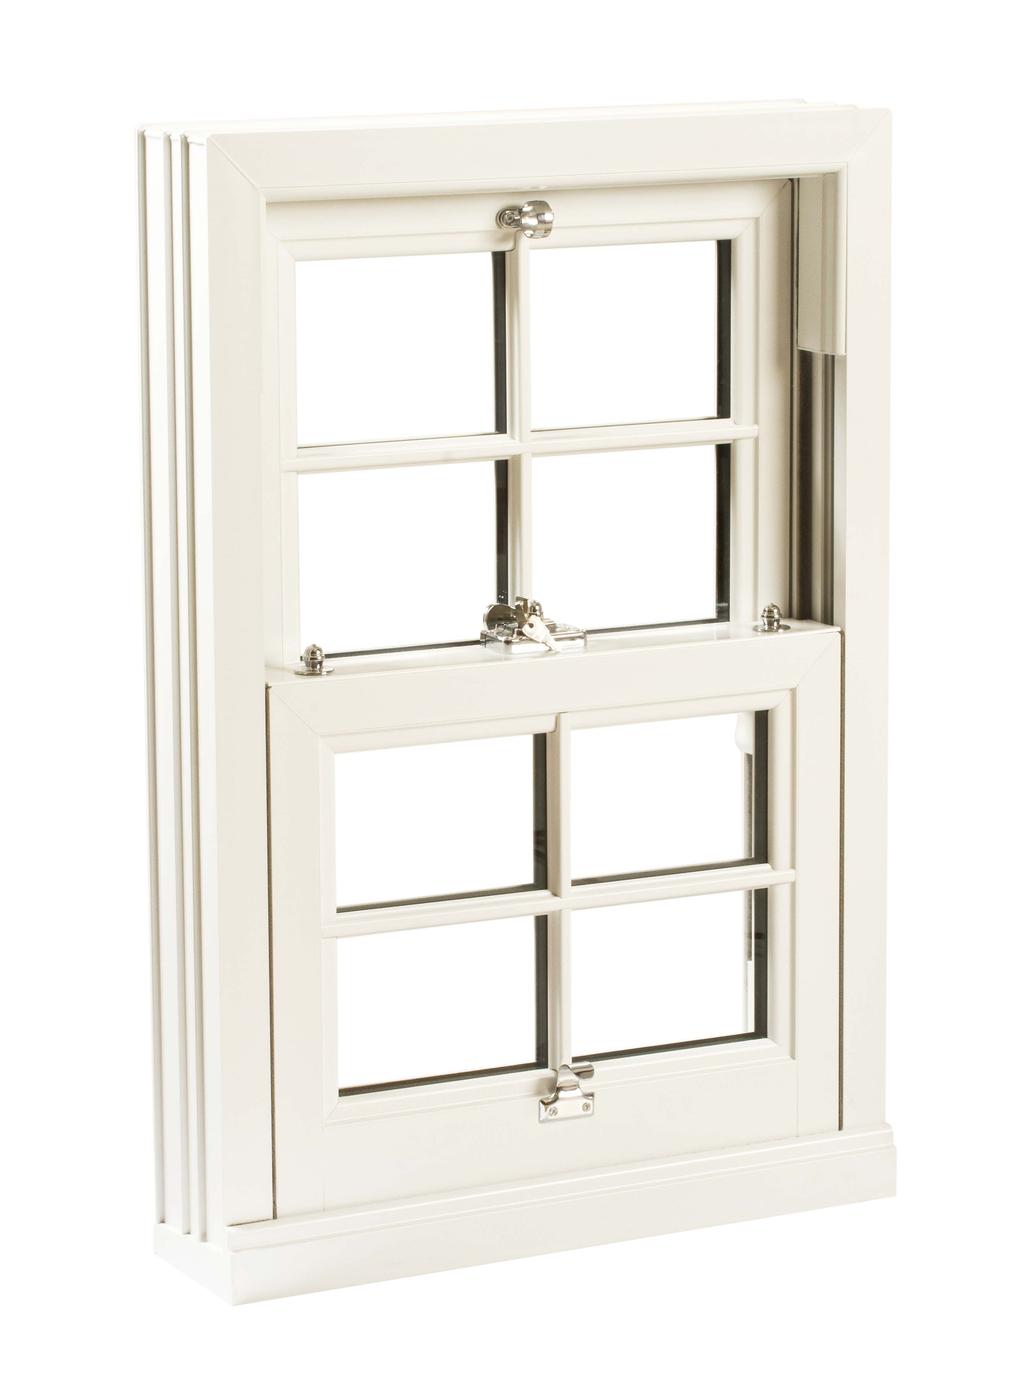 Quick Release Hinges To achieve a traditional look without the need for individual units of glass, our